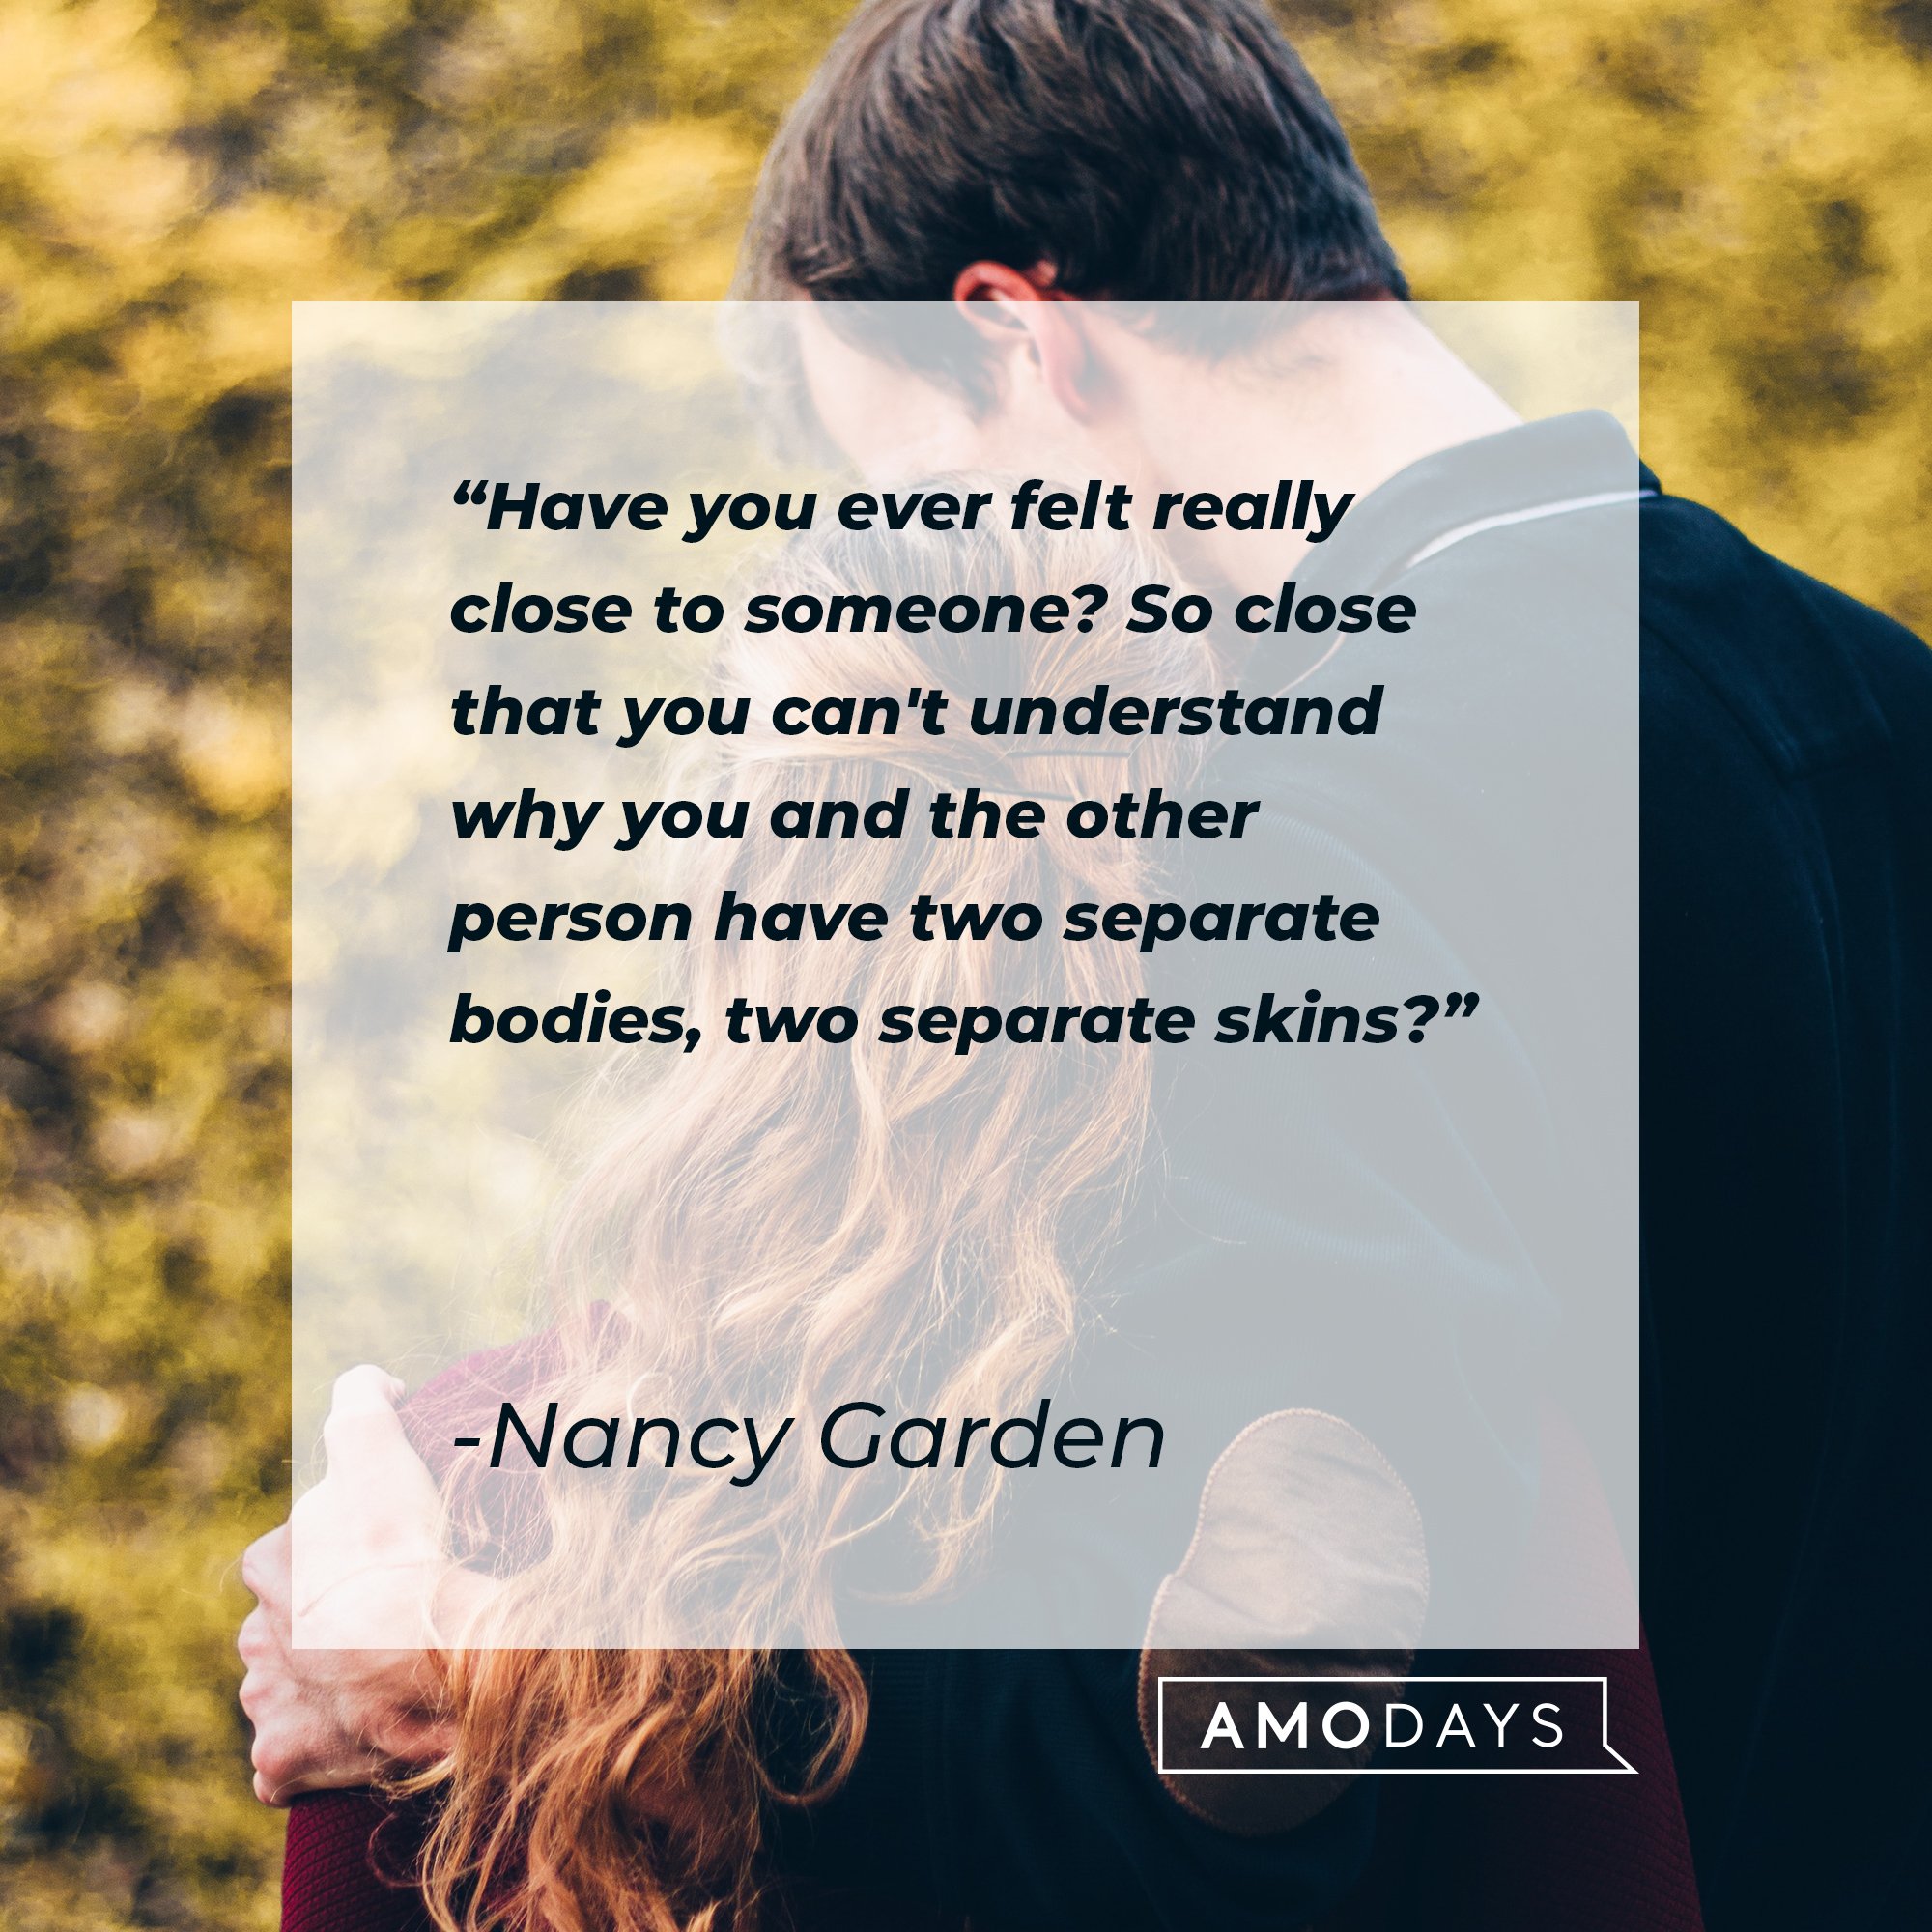 Nancy Garden’s quote: "Have you ever felt really close to someone? So close that you can't understand why you and the other person have two separate bodies, two separate skins?" | Image: AmoDays